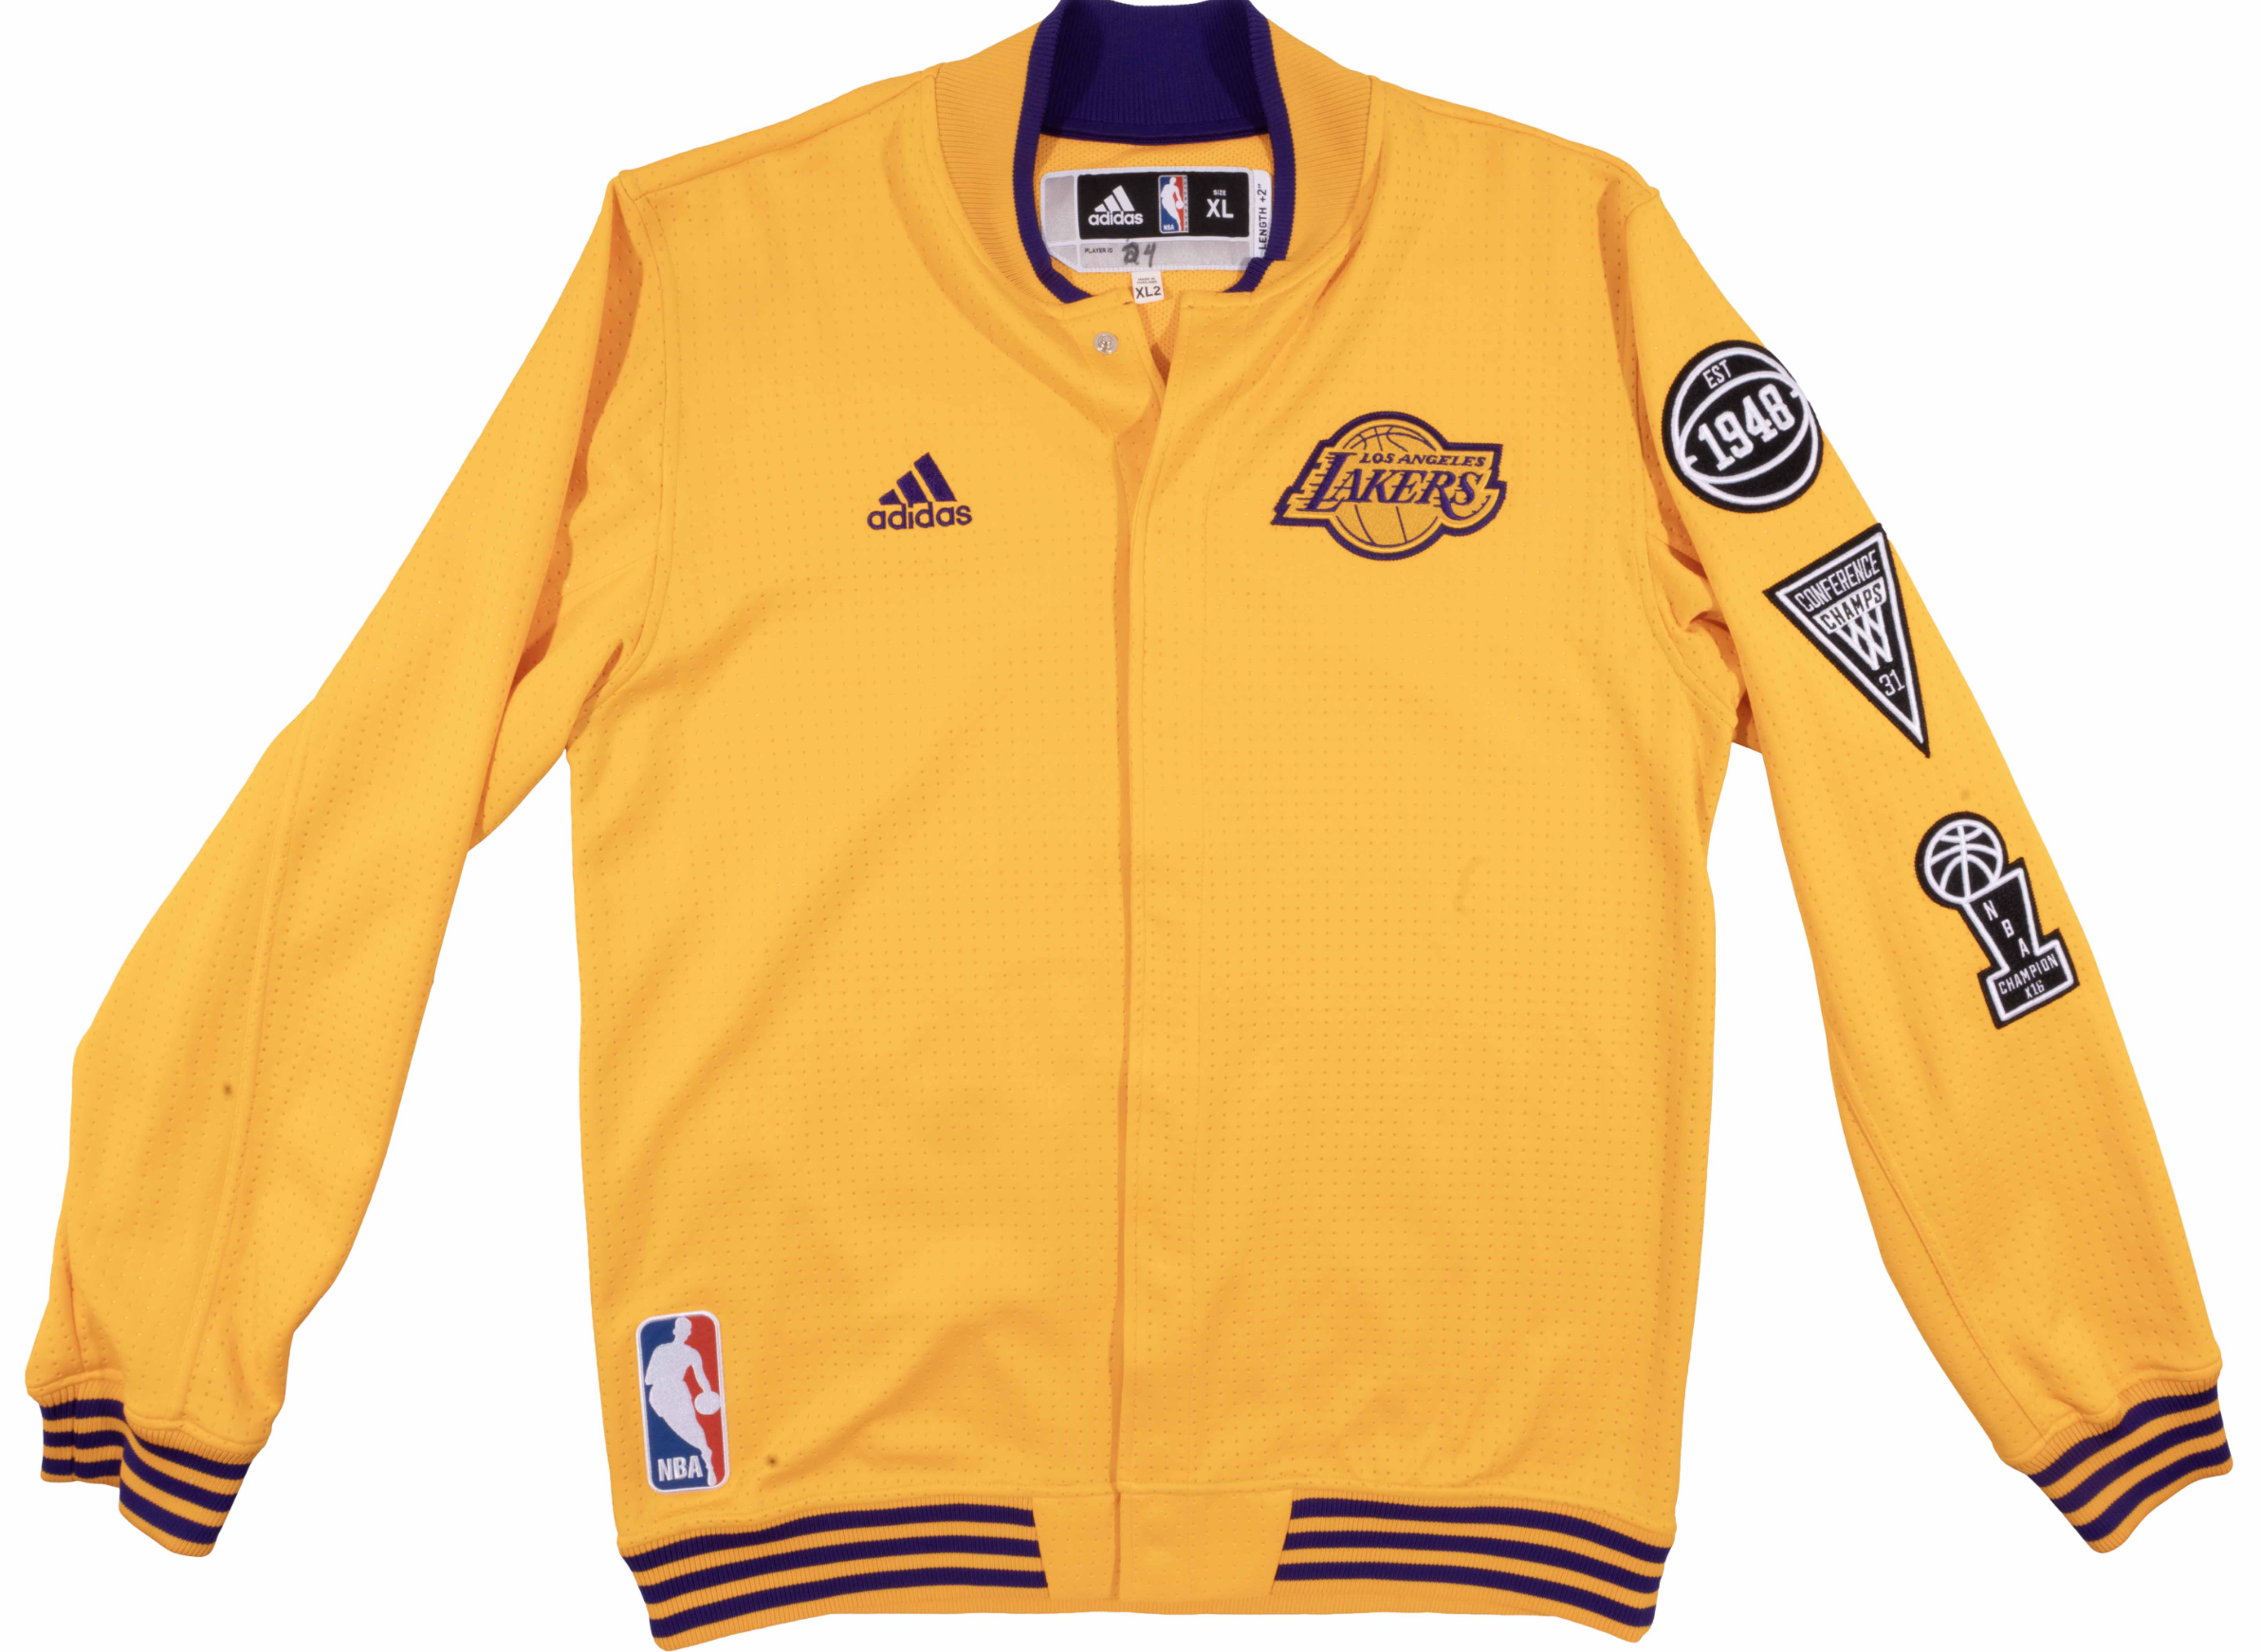 Own a Piece of History: Kobe Bryant’s Final Game Warm-Up Jacket Up for Auction